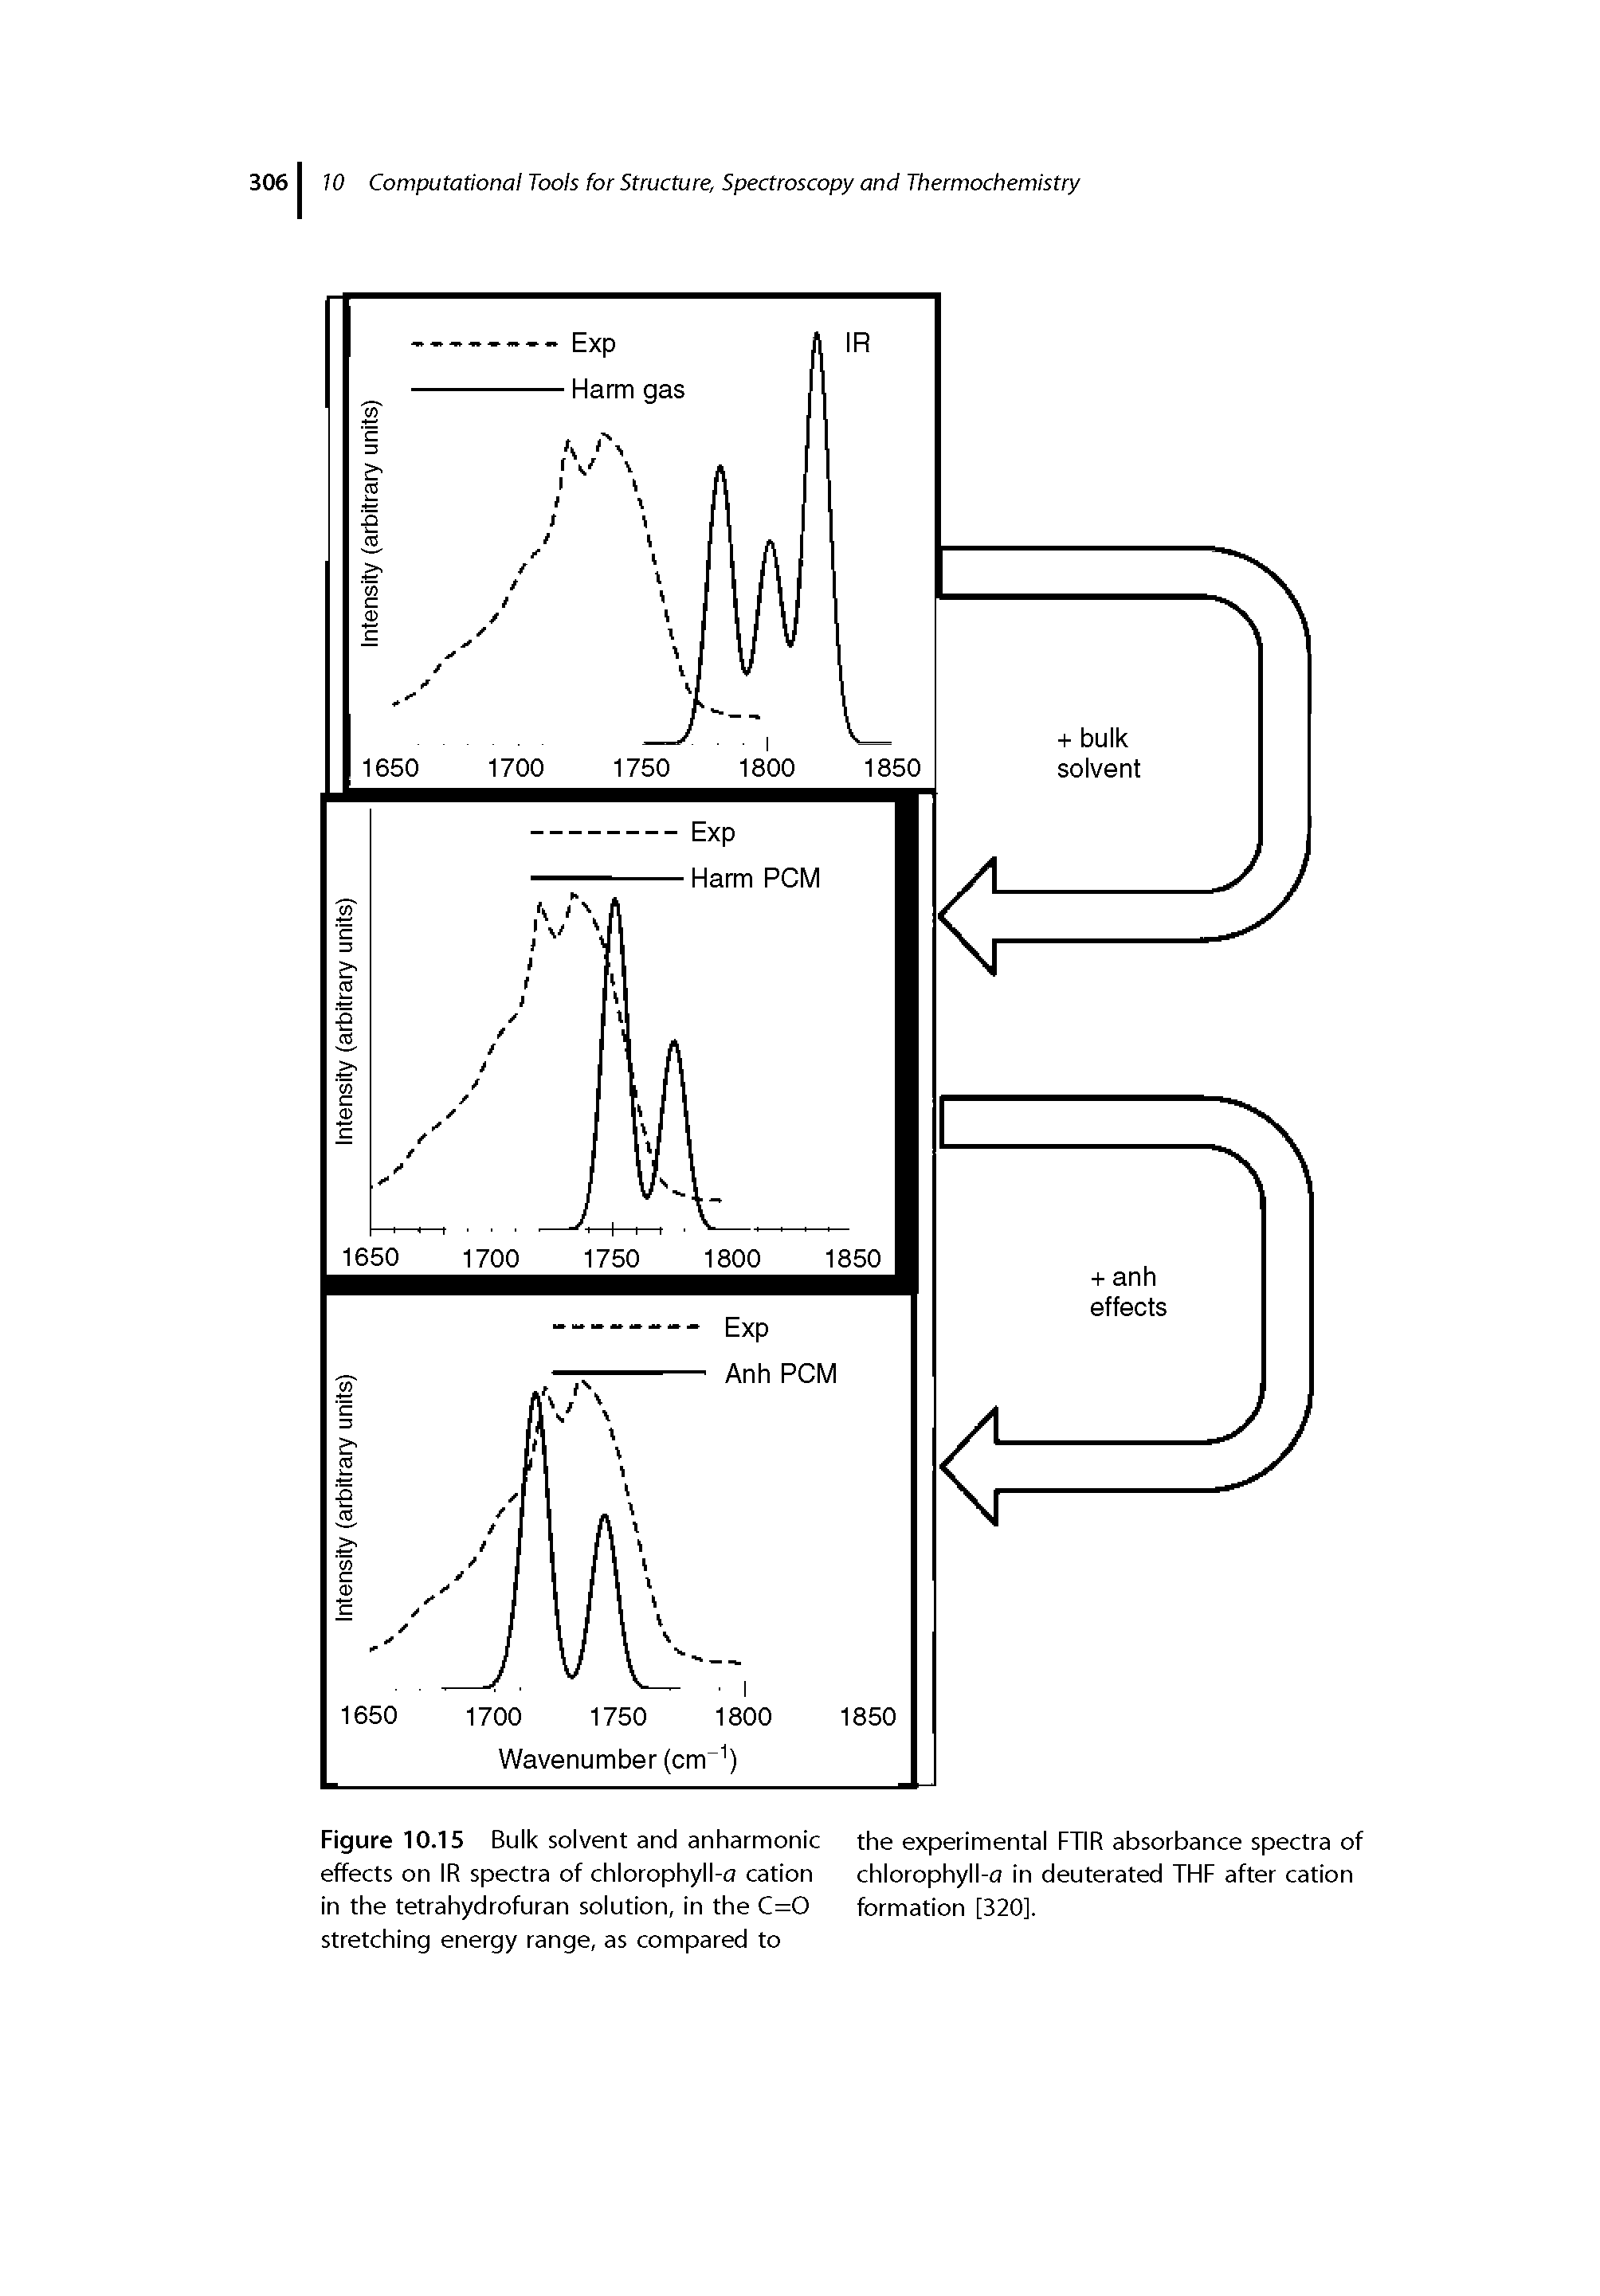 Figure 10.15 Bulk solvent and anharmonic the experimental FTIR absorbance spectra of effects on IR spectra of chlorophyll-a cation chlorophyll-a in deuterated THF after cation in the tetrahydrofuran solution, in the C=0 formation [320]. stretching energy range, as compared to...